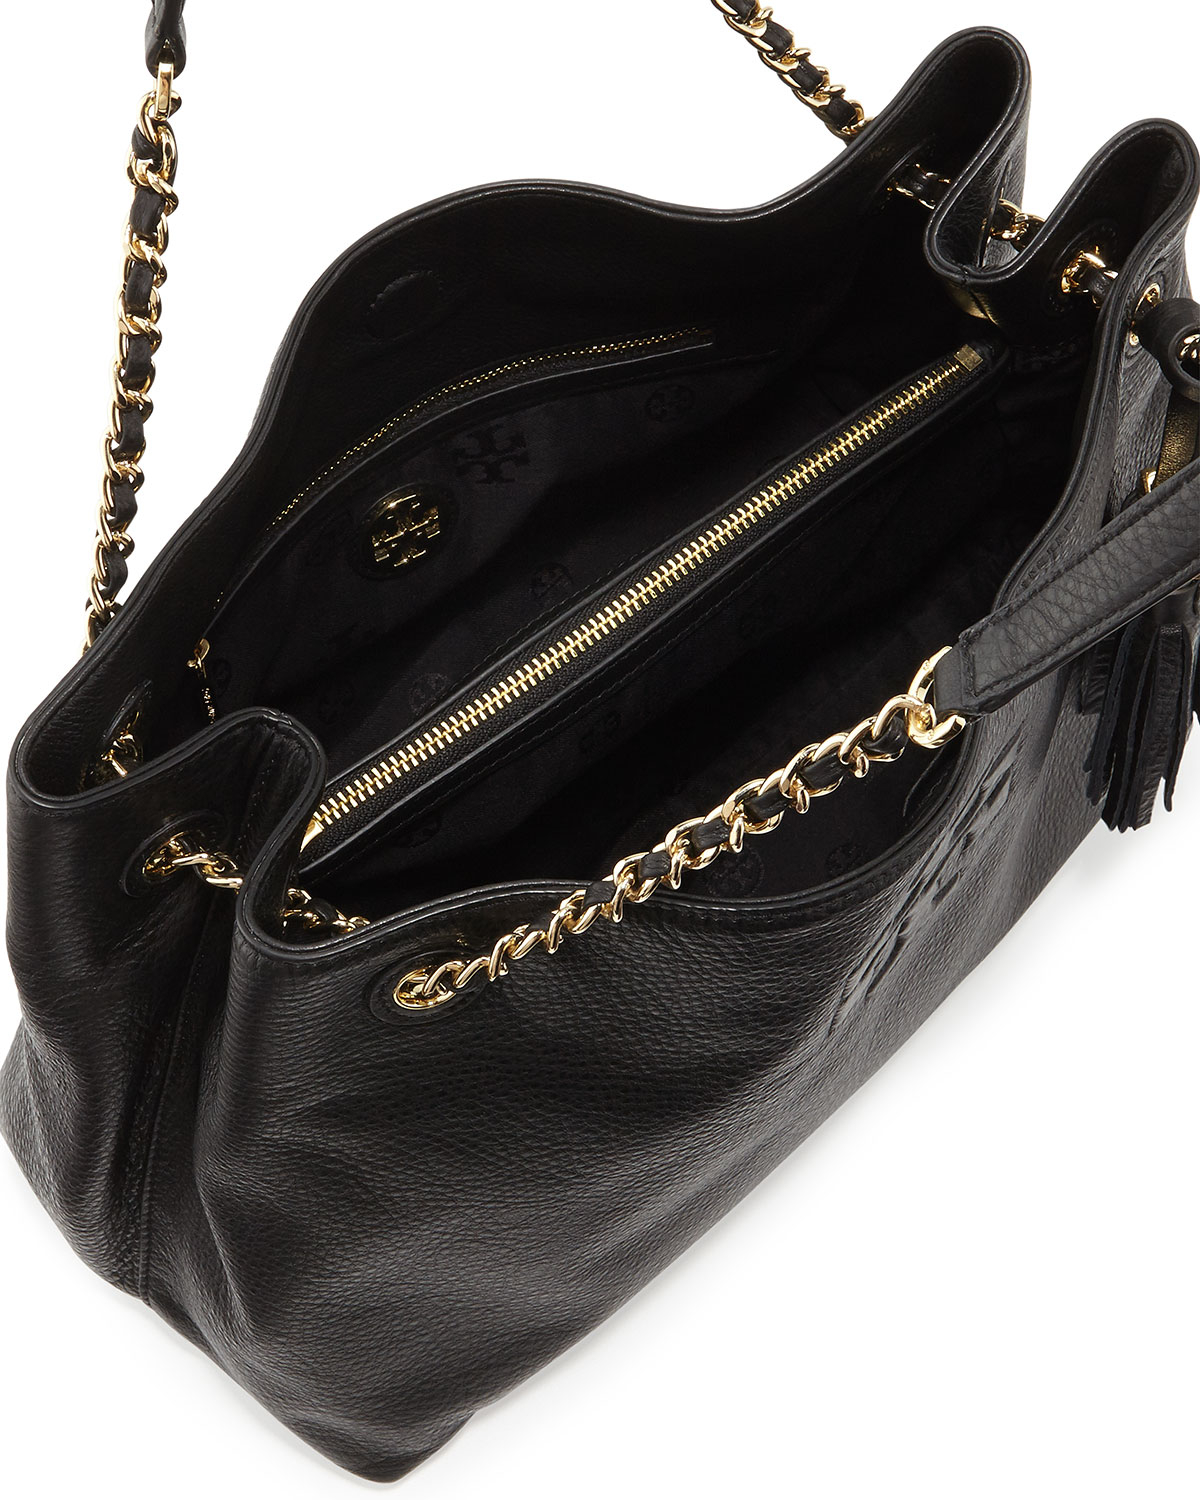 Tory burch Thea Large Chain Tote Bag in Black | Lyst